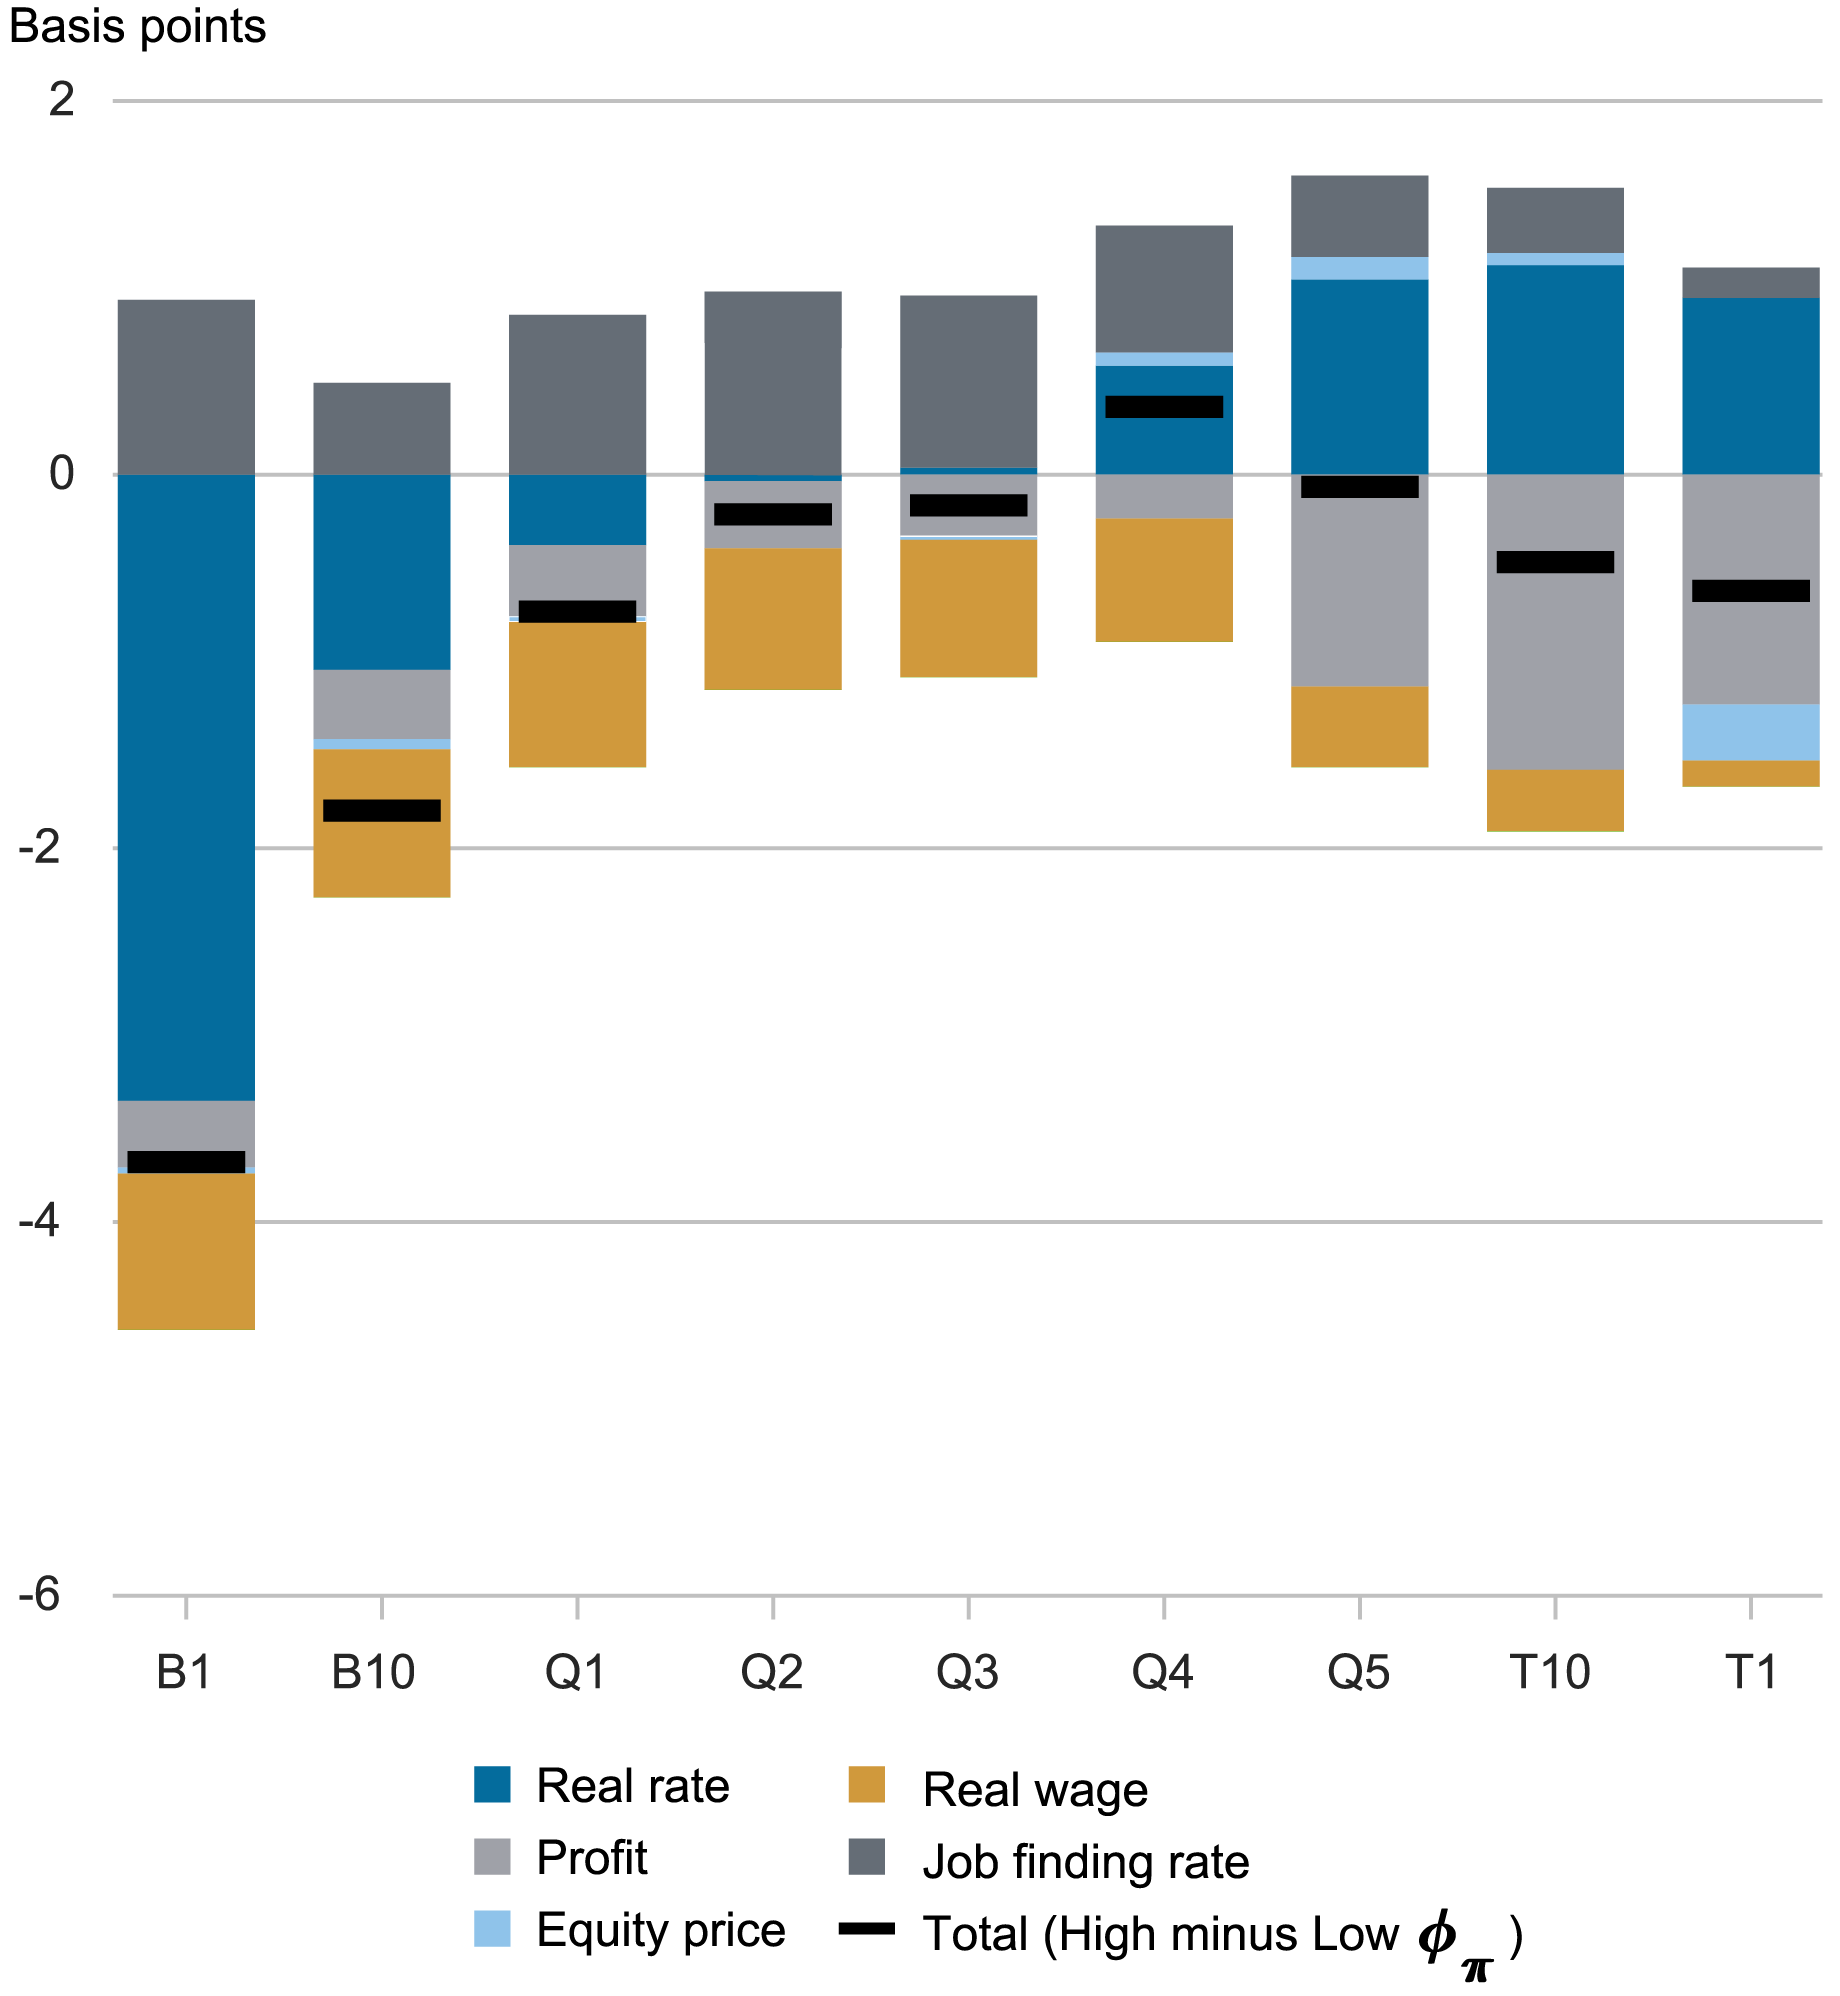 bar chart tracking the effects of distributional consequences of a stronger policy response to cost push shocks by basis points, from the bottom 1 percent of wealth distribution (far left) increasing to the top 1 percent of wealth distribution (far right), by real rate (dark blue), profit (light gray), equity price (light blue), real wage (gold), job finding rate (dark gray), and total high minus low φ π (black line)